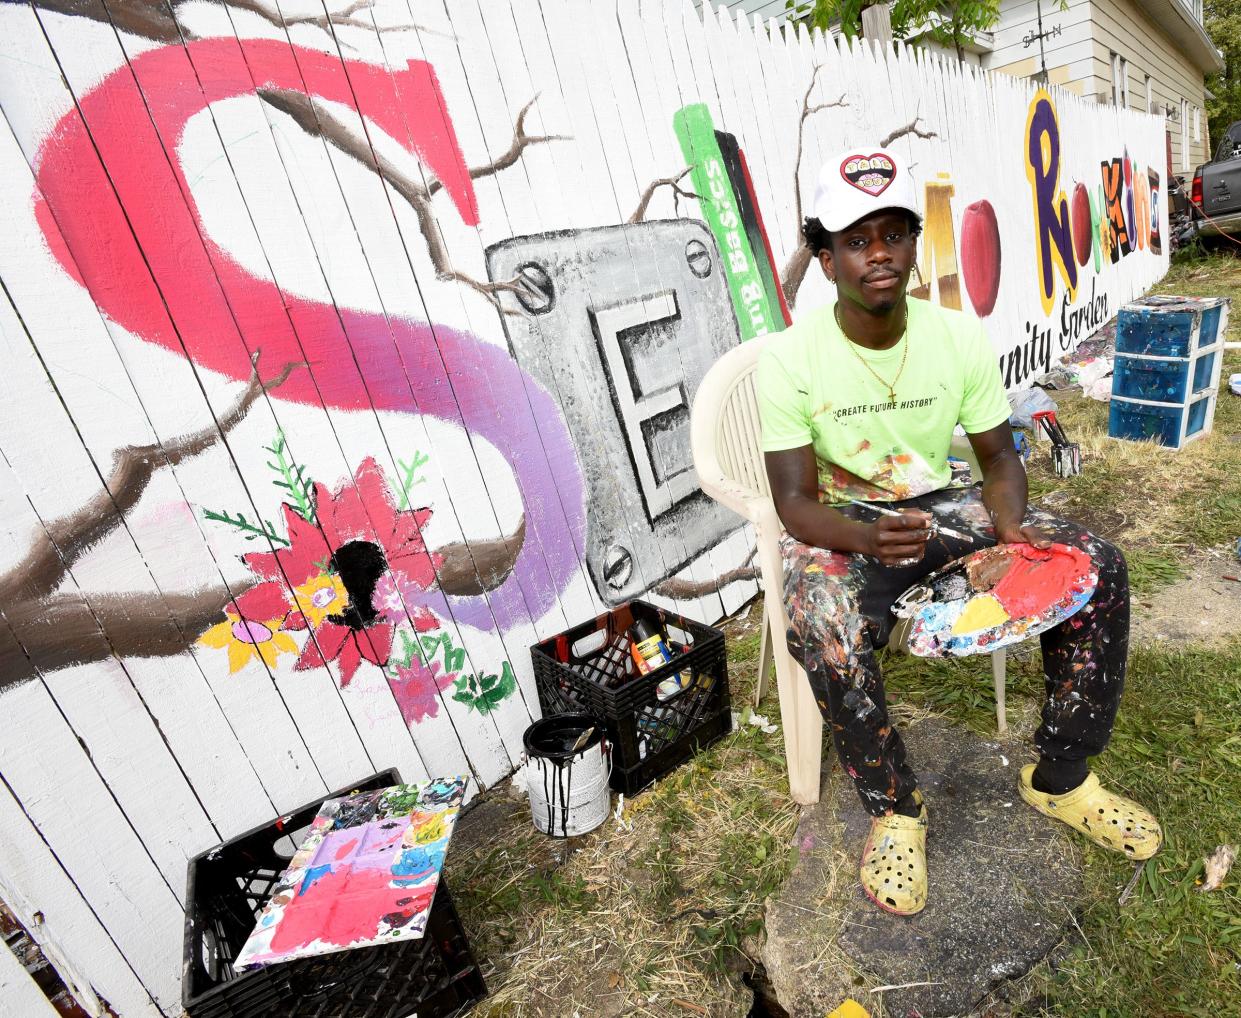 Artist Tony Wavy, formerly from Monroe, now living in Lexington, Ky., painted a mural on the fence at the Selma Rankins Jr. Community Garden as part of Plntng Seeds program in Monroe.